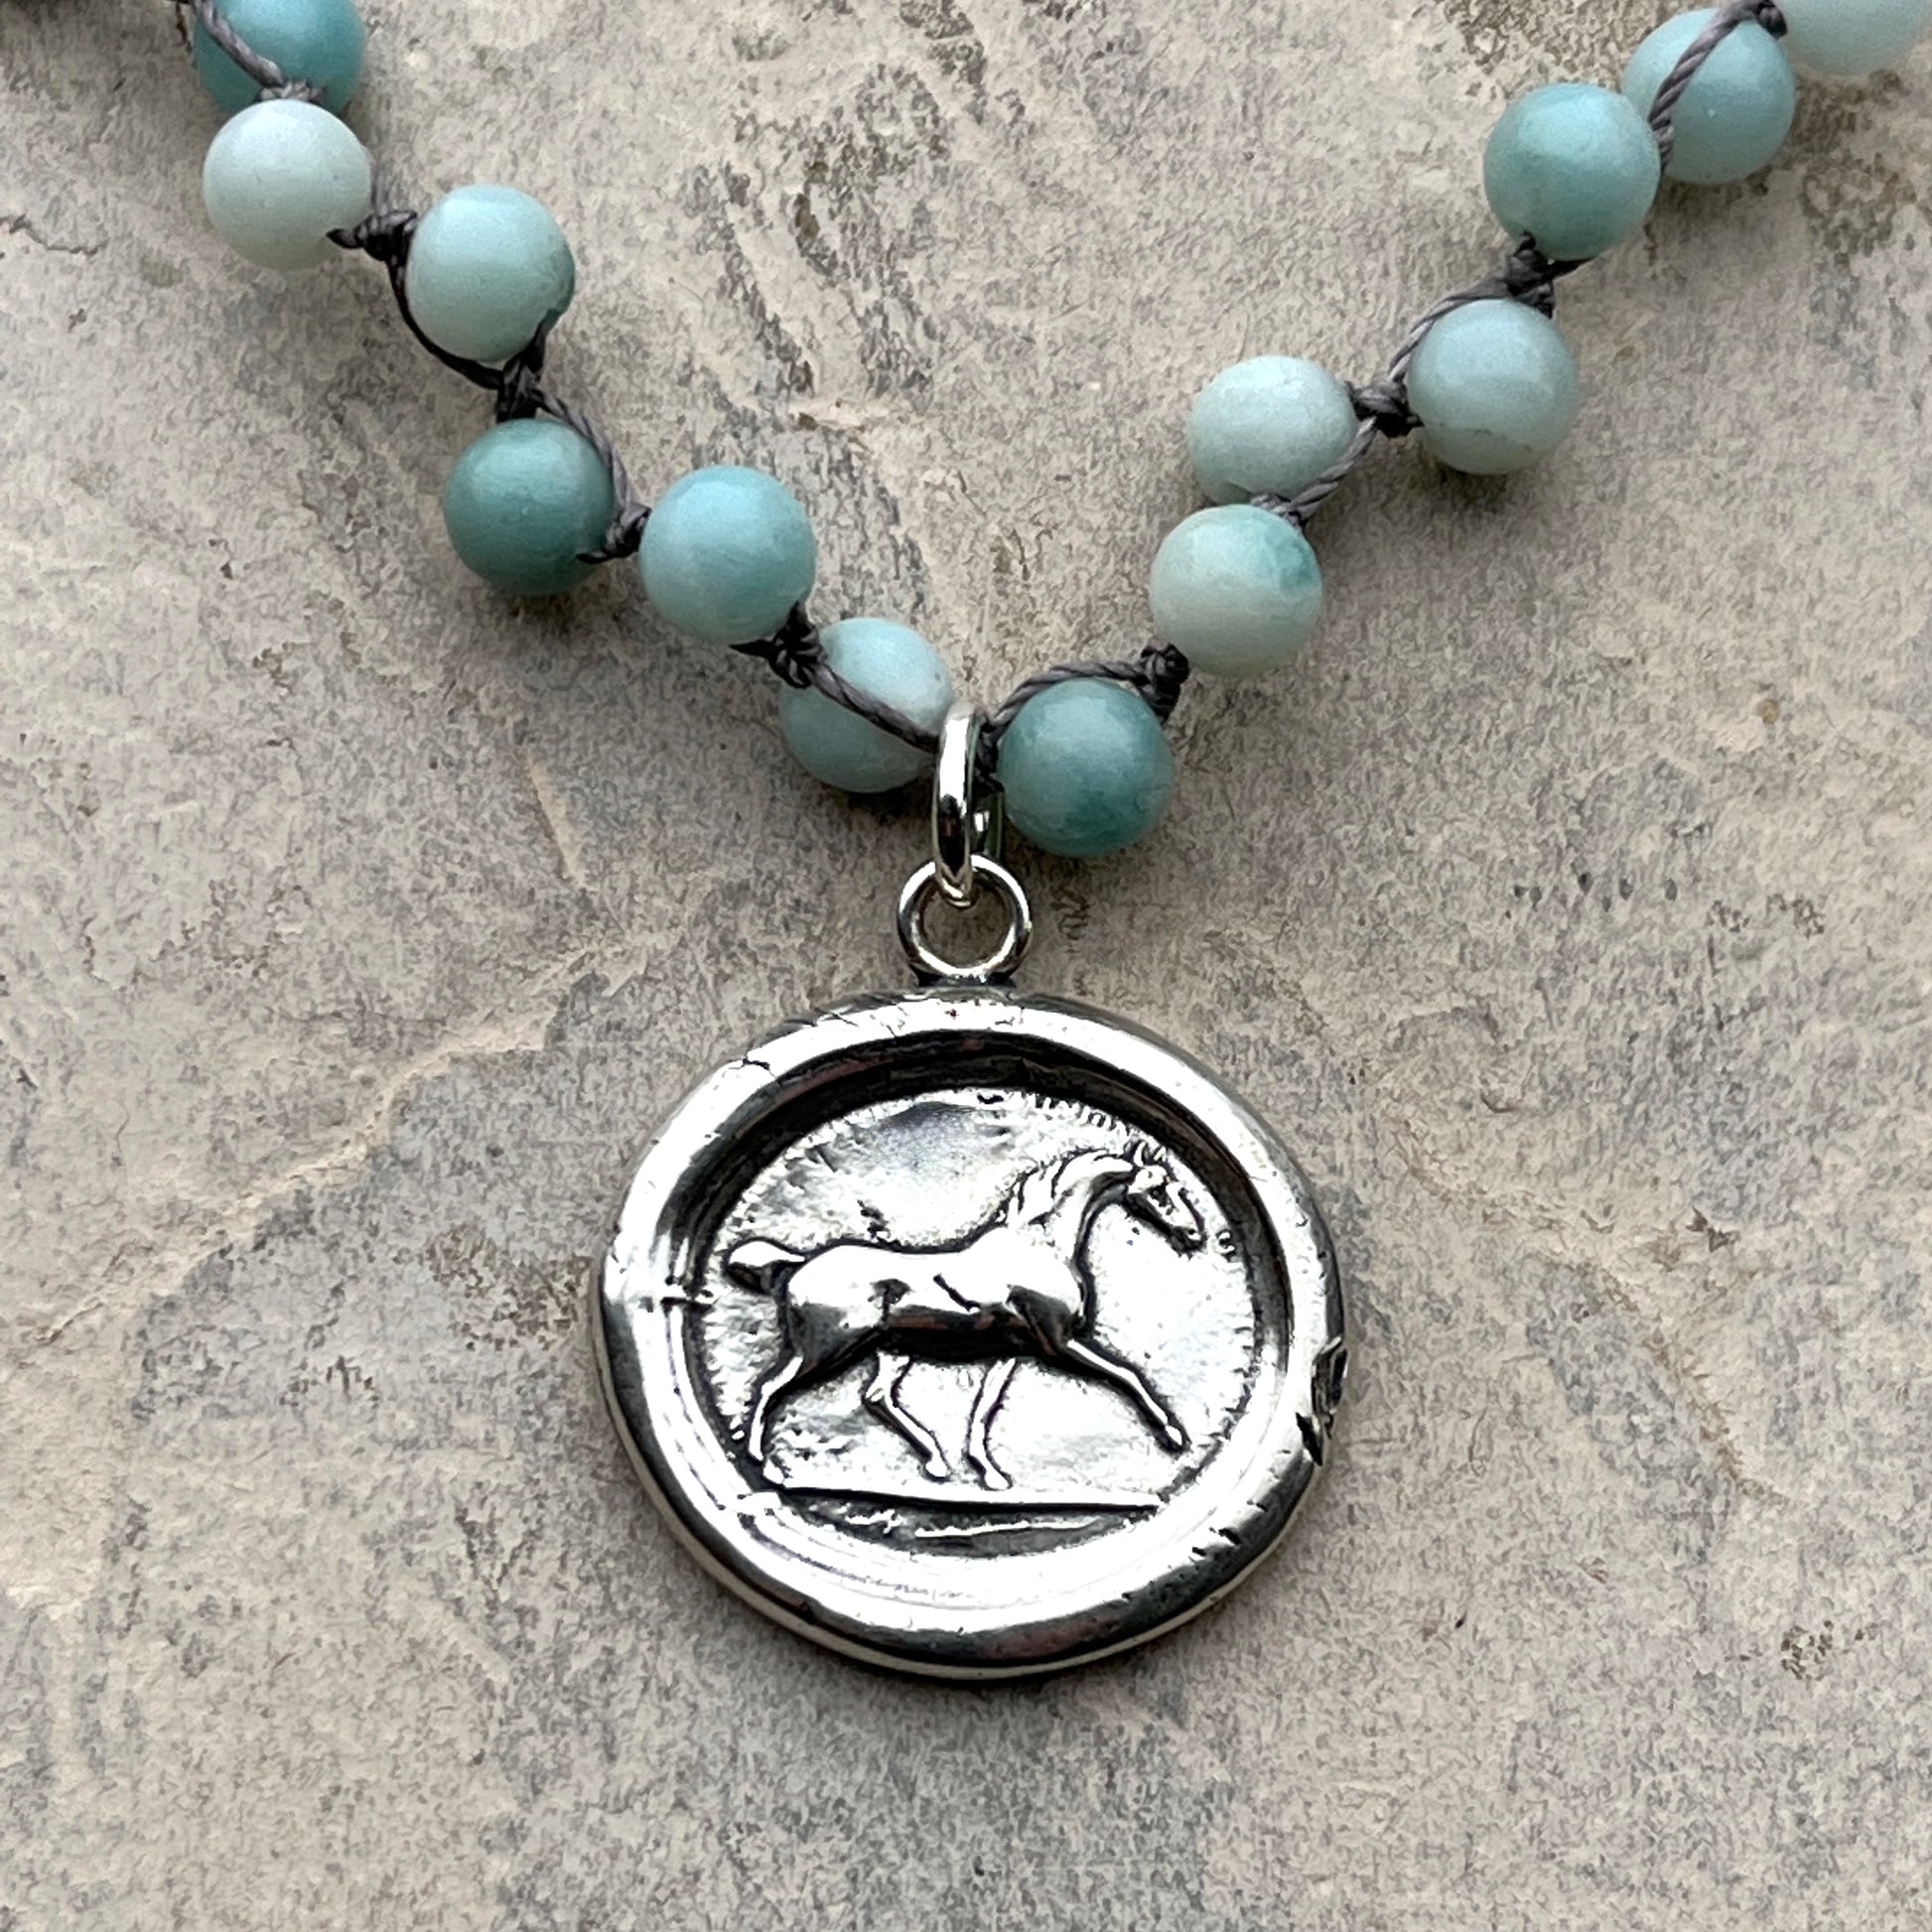 Equestrian Wax Stamp Necklace